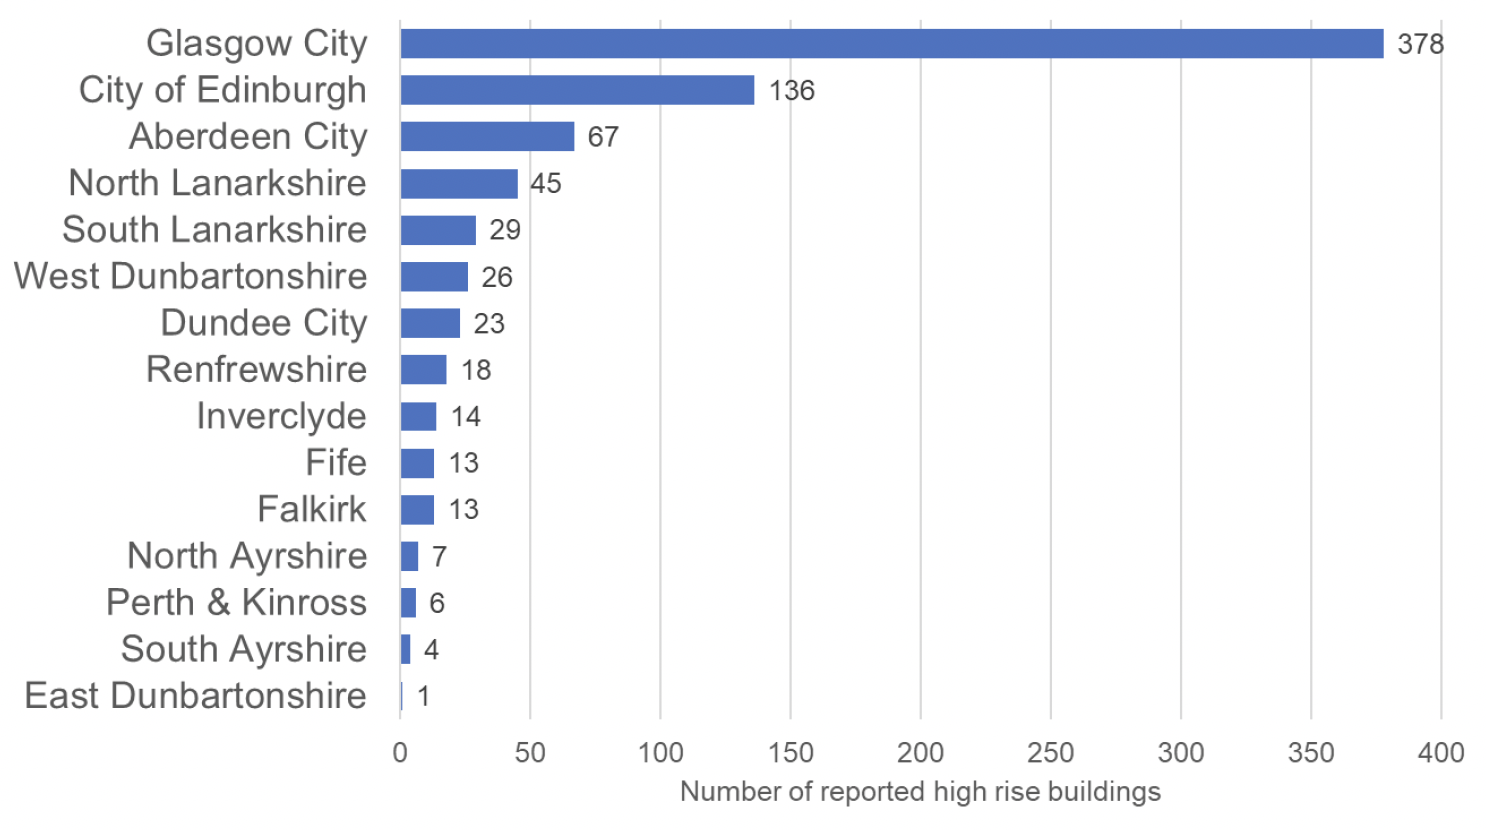 Bar chart showing the split of residential high rise buildings by local authority.